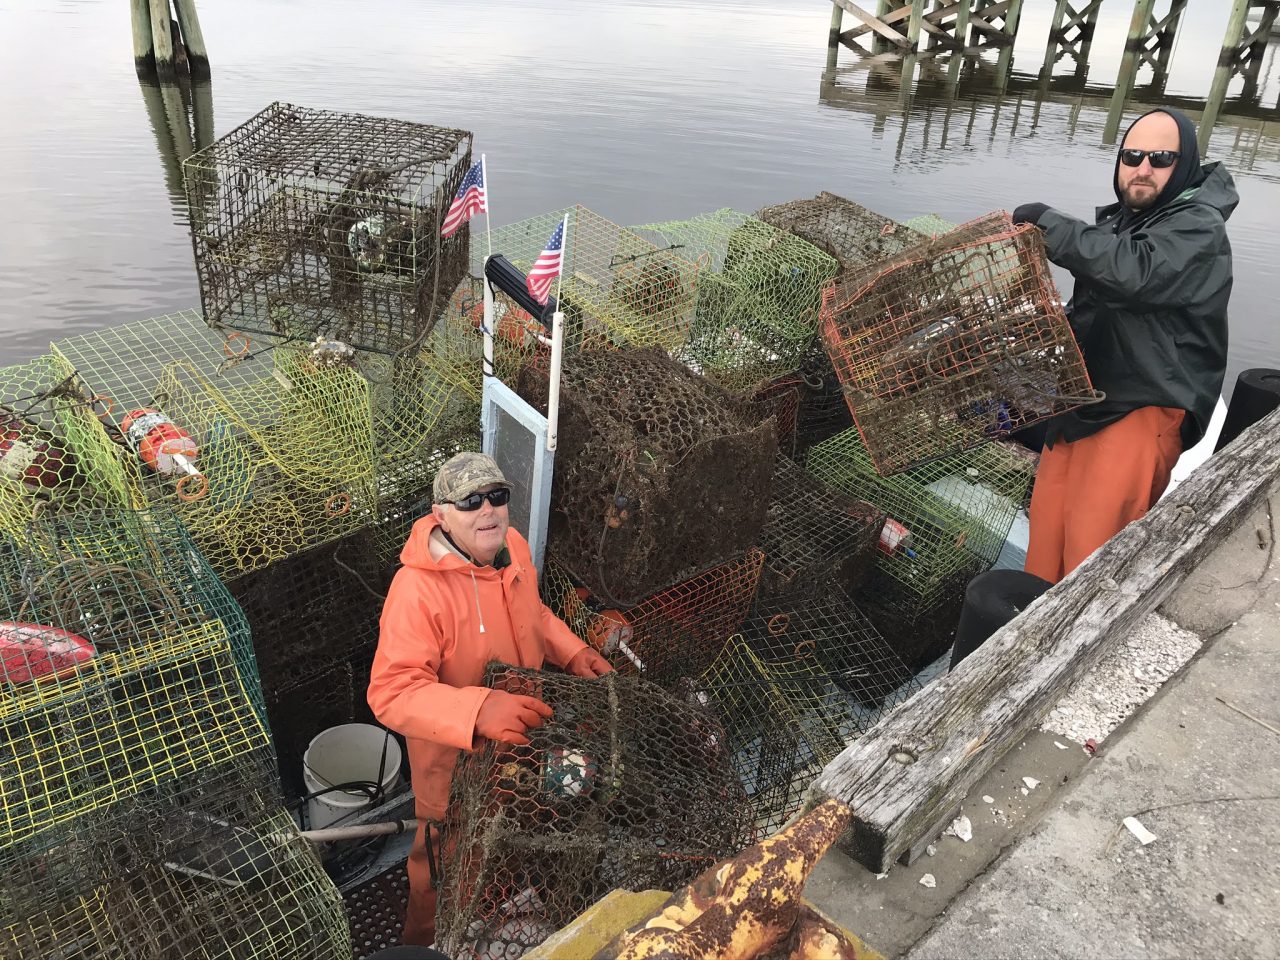 Annual project to remove lost fishing gear underway